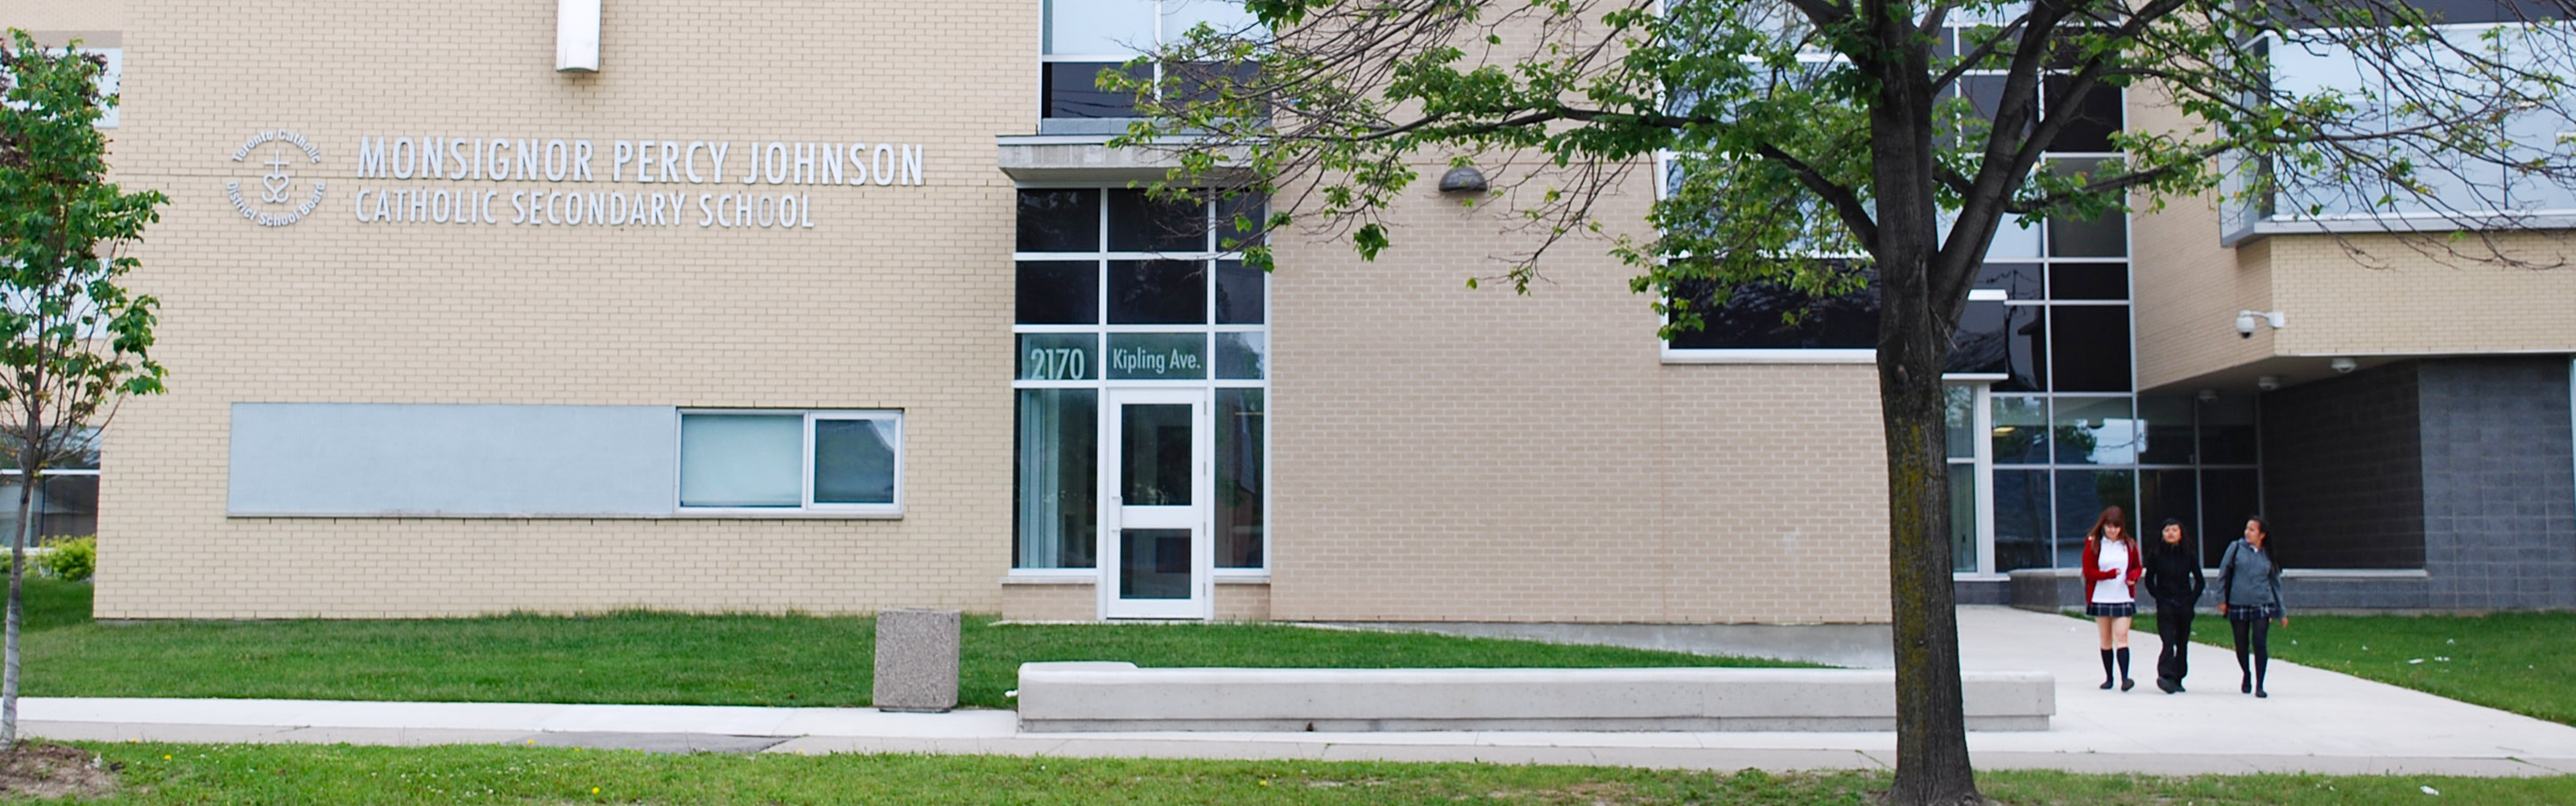 Front of the Monsignor Percy Johnson Catholic Secondary School building!